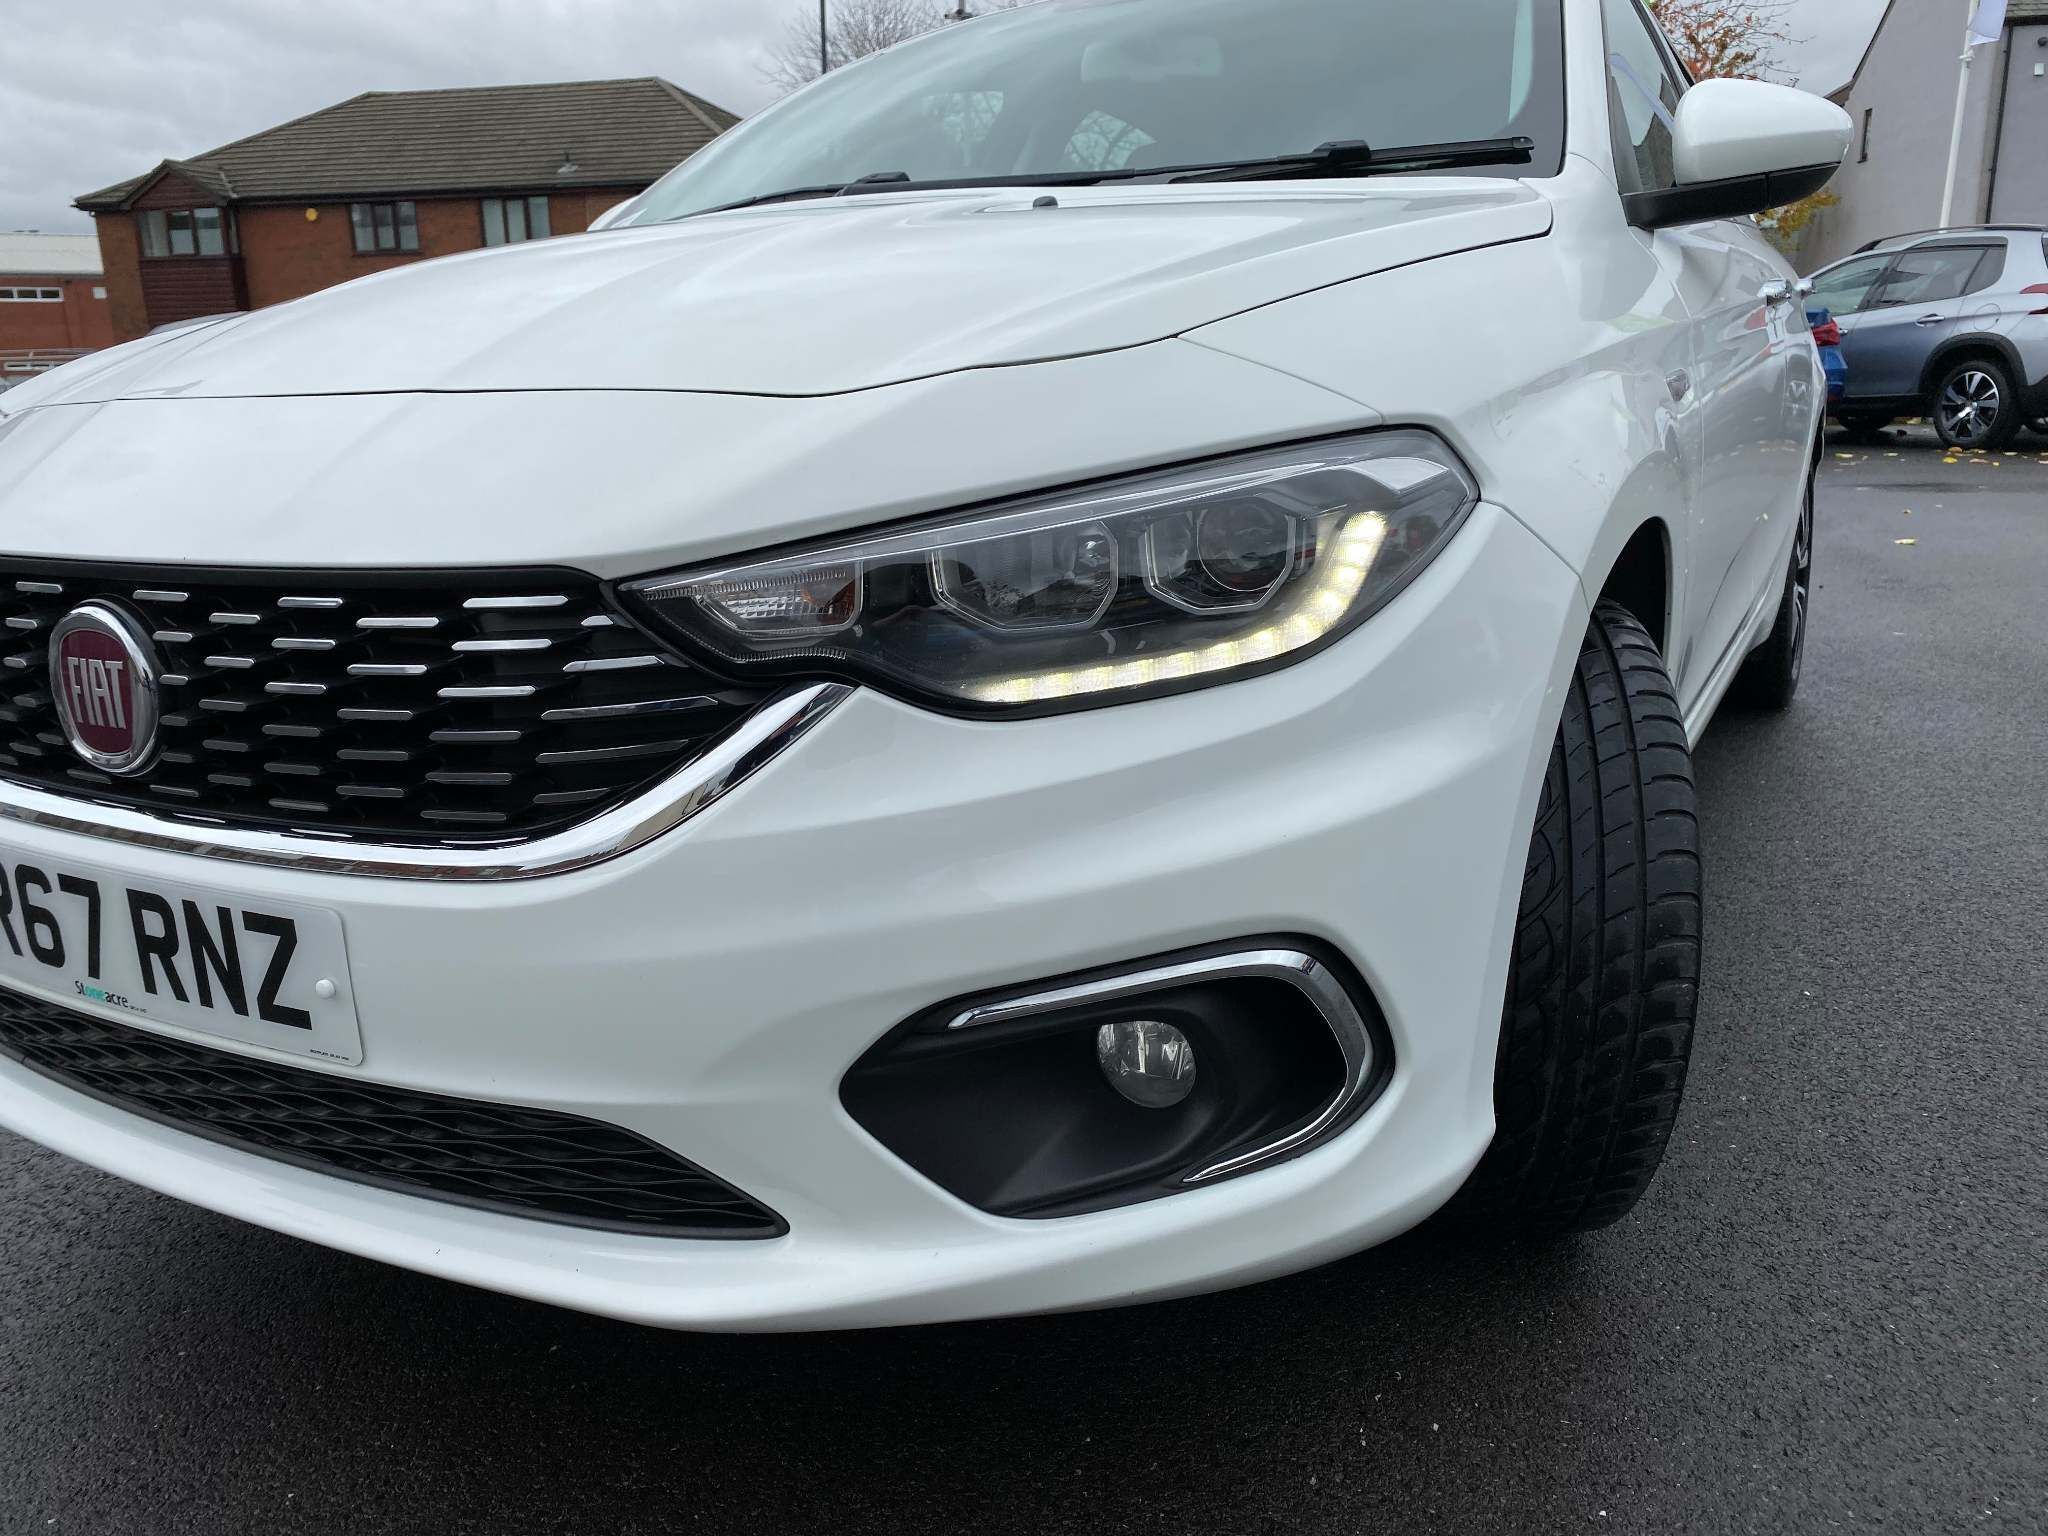 Used Fiat Tipo 1.4 Lounge 5dr (WR67RNZ) Stoneacre